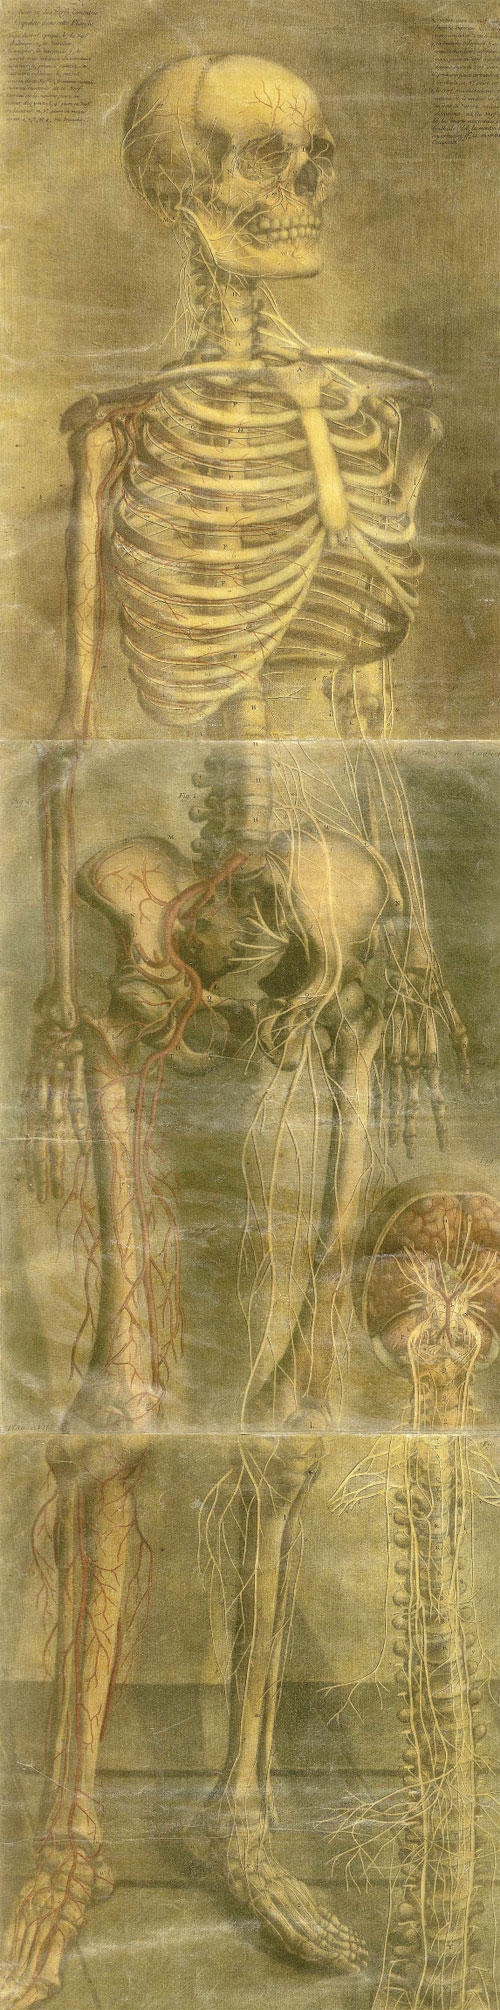 Four-color mezzotint skeleton by anatomy illustrator Jacques Fabian Gautier d'Agoty, from the mid-18th century